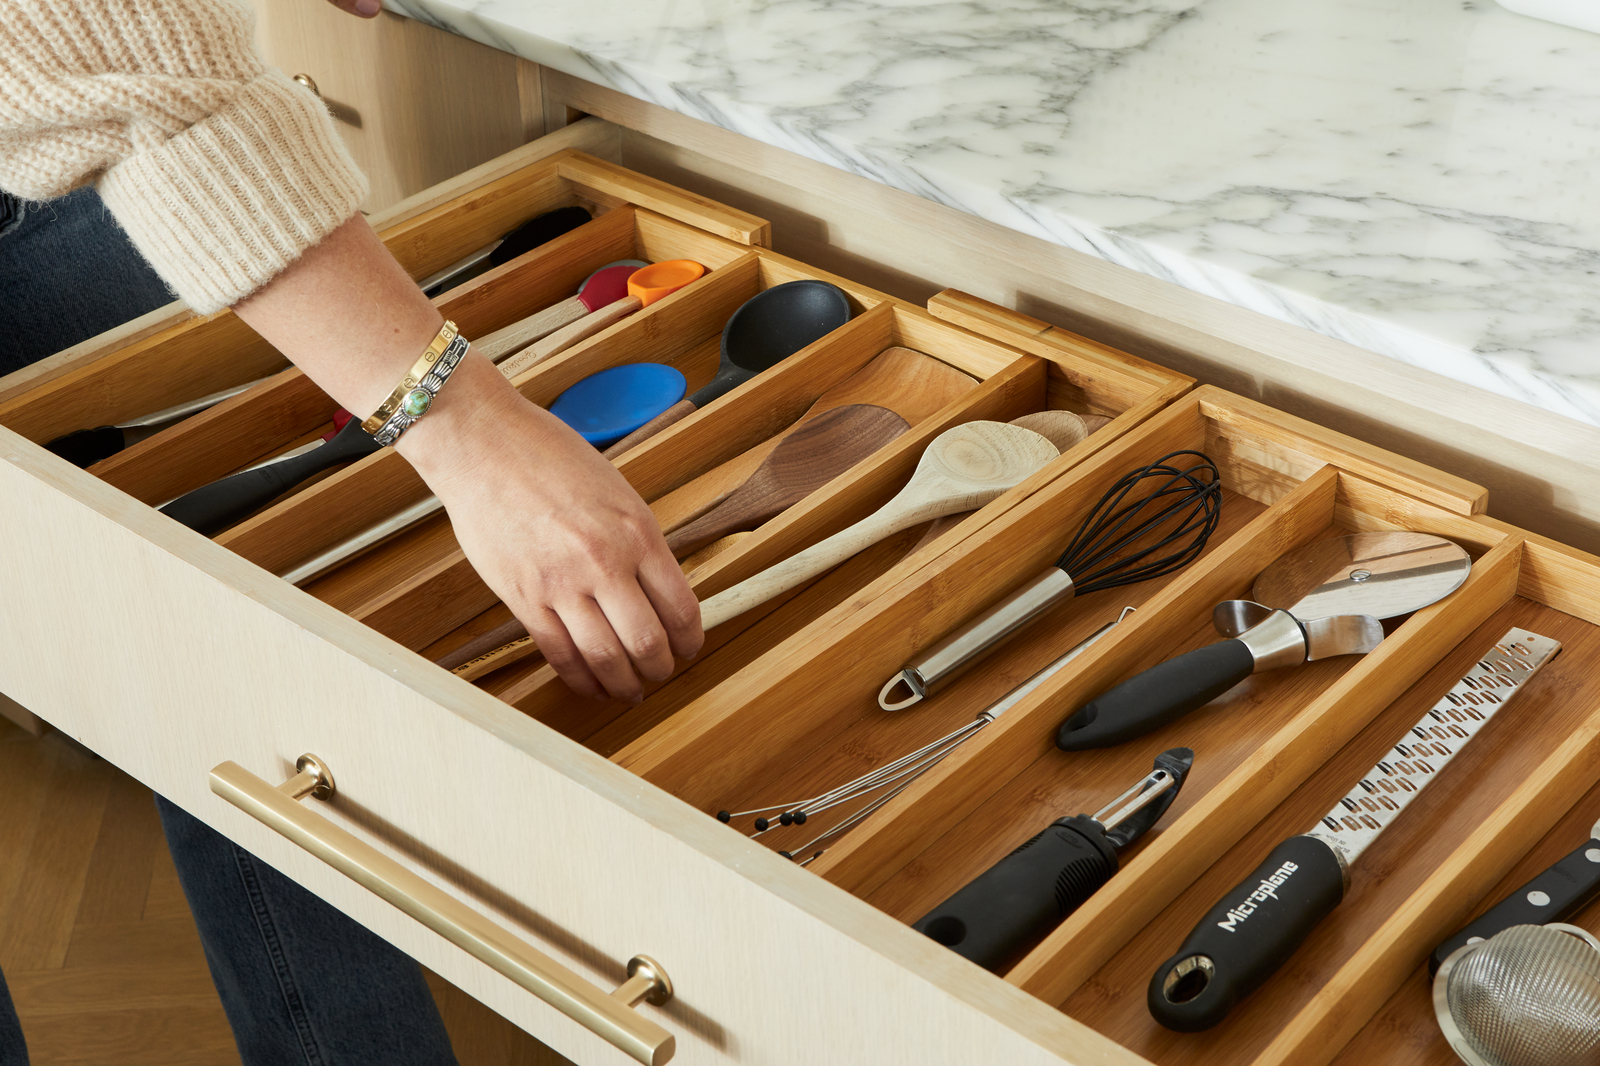 Do You Have A Sewing Kit In Your Kitchen Drawer?